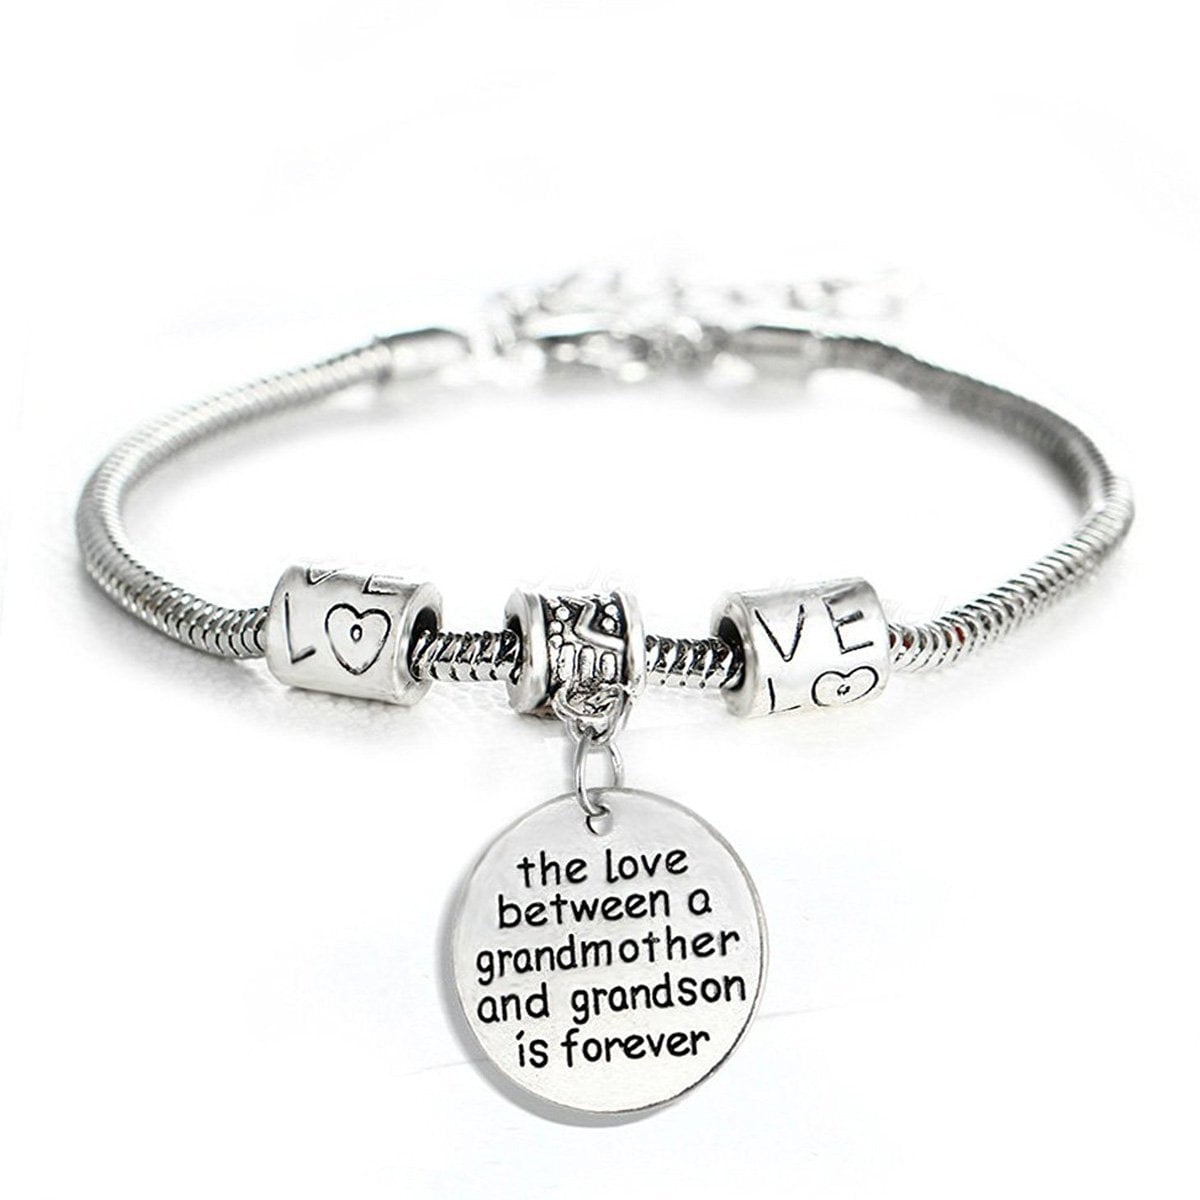 Fashion Jewelry Love Between a Grandmother and Grandson is Forever Charm Bracelet 